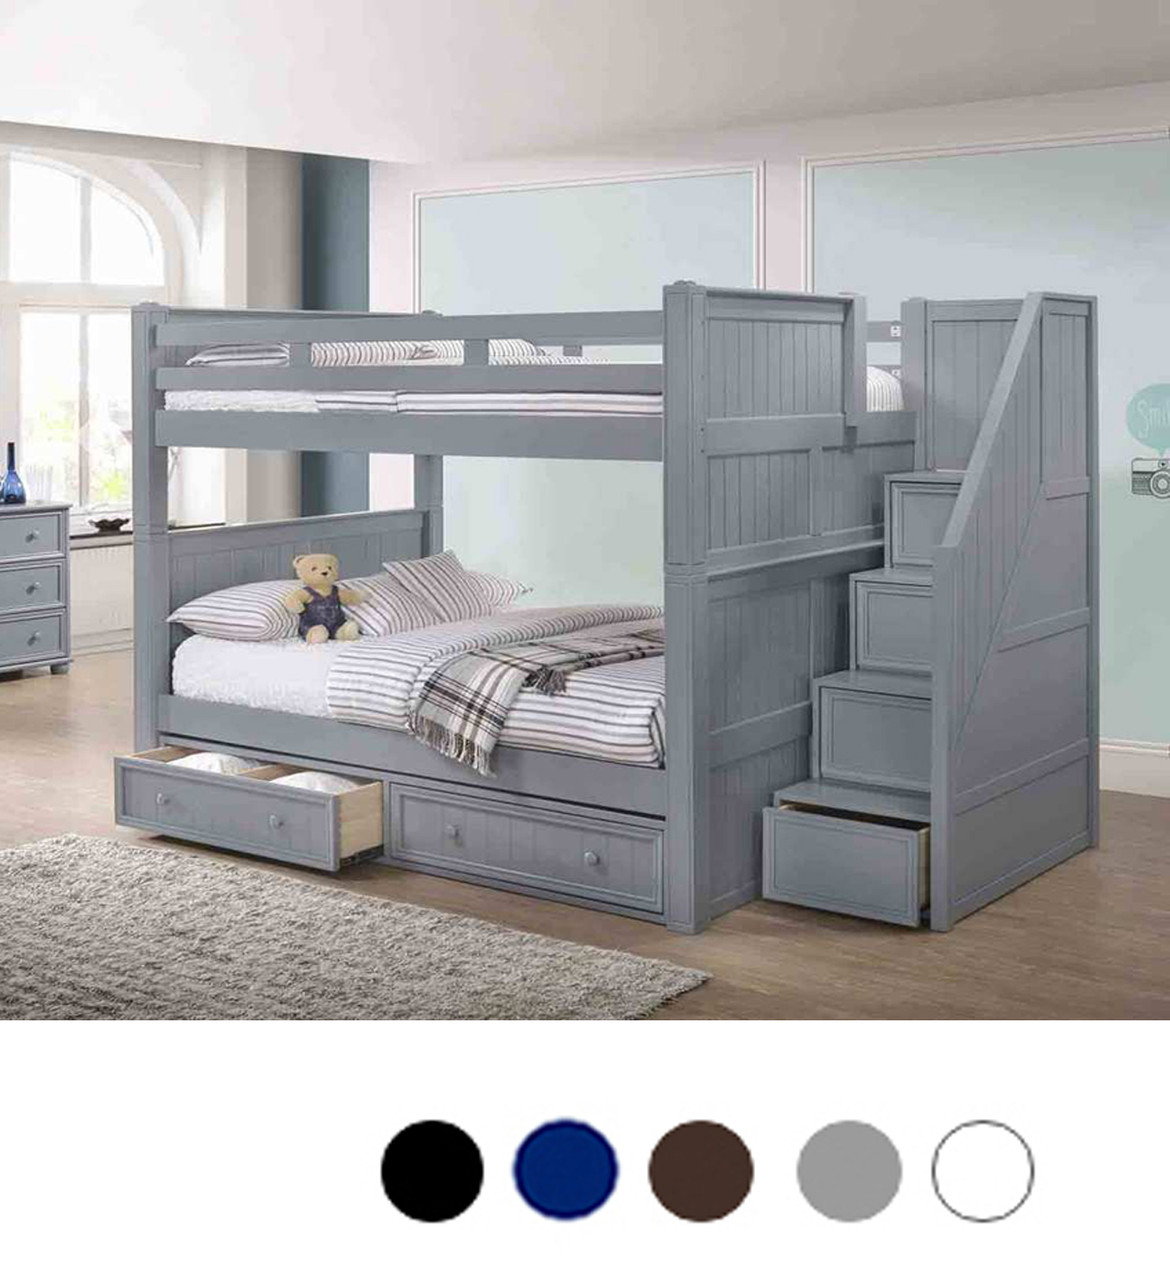 bunk beds with lots of storage